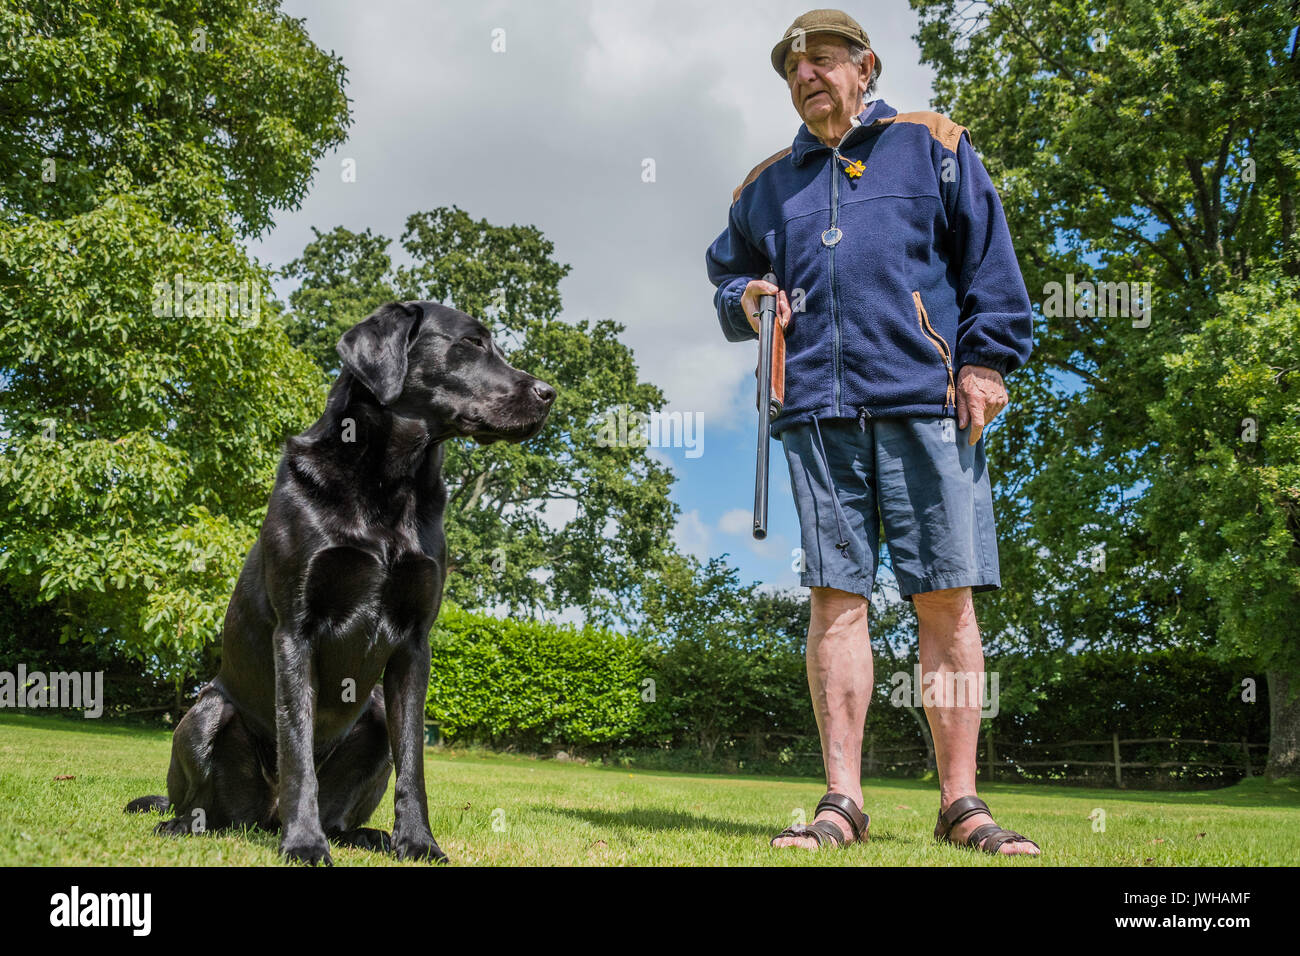 Sussex, UK. 12th Aug, 2017. The glorious 12th and Kevin celebrates his 88th birthday with gun and dog. Credit: Guy Bell/Alamy Live News Stock Photo